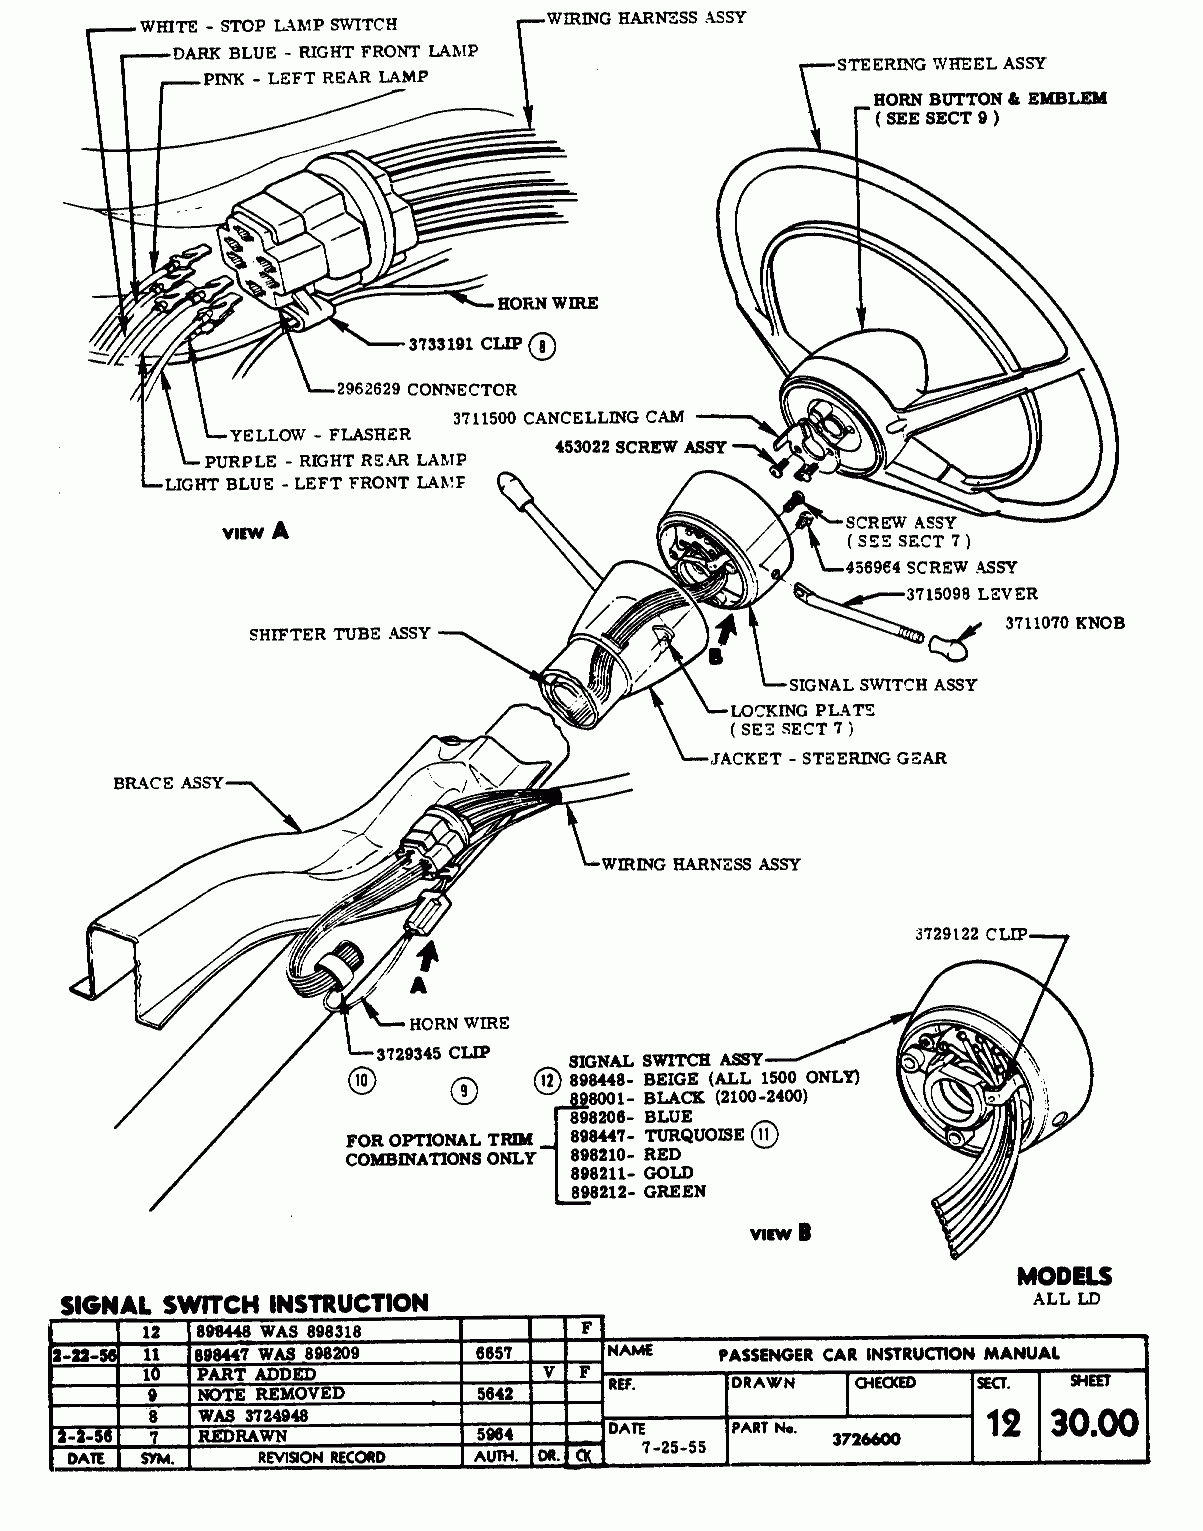 Chevy Ignition Switch Wiring Help Hot Rod Forum Hotrodders Ididit - Gm Ignition Switch Wiring Diagram